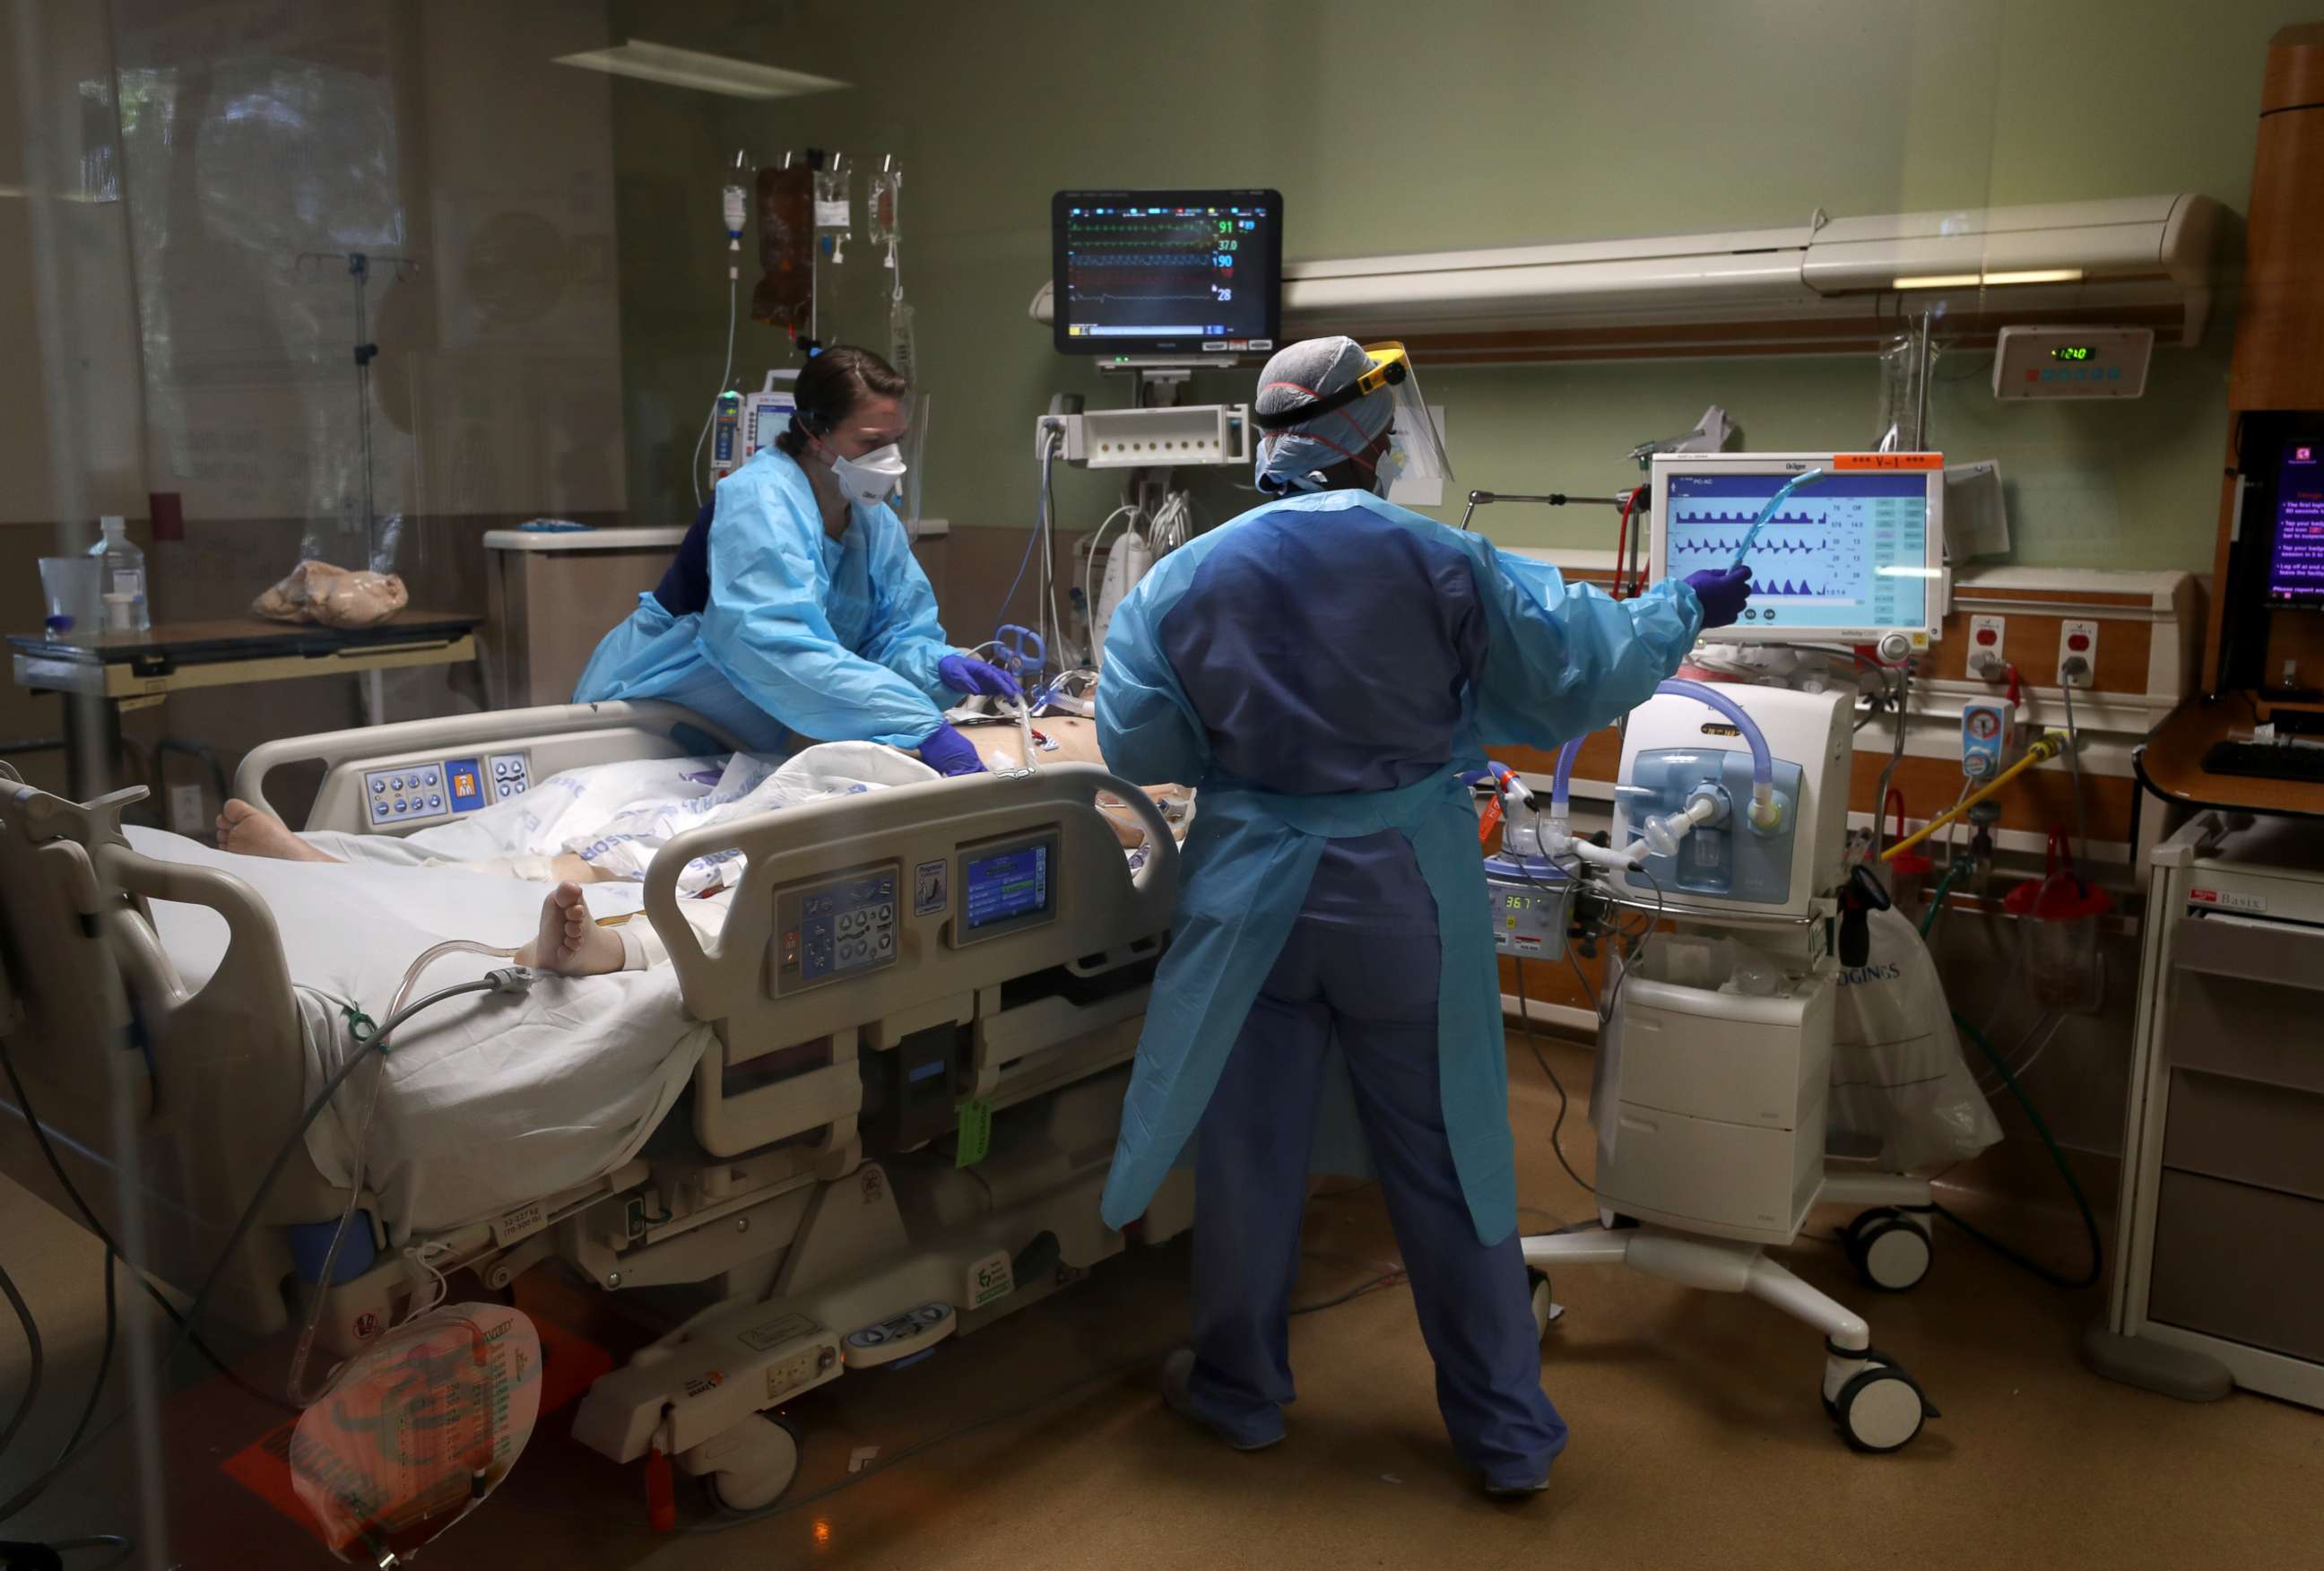 PHOTO: Nurses care for a coronavirus COVID-19 patient in the intensive care unit (I.C.U.) at Regional Medical Center on May 21, 2020 in San Jose, California.